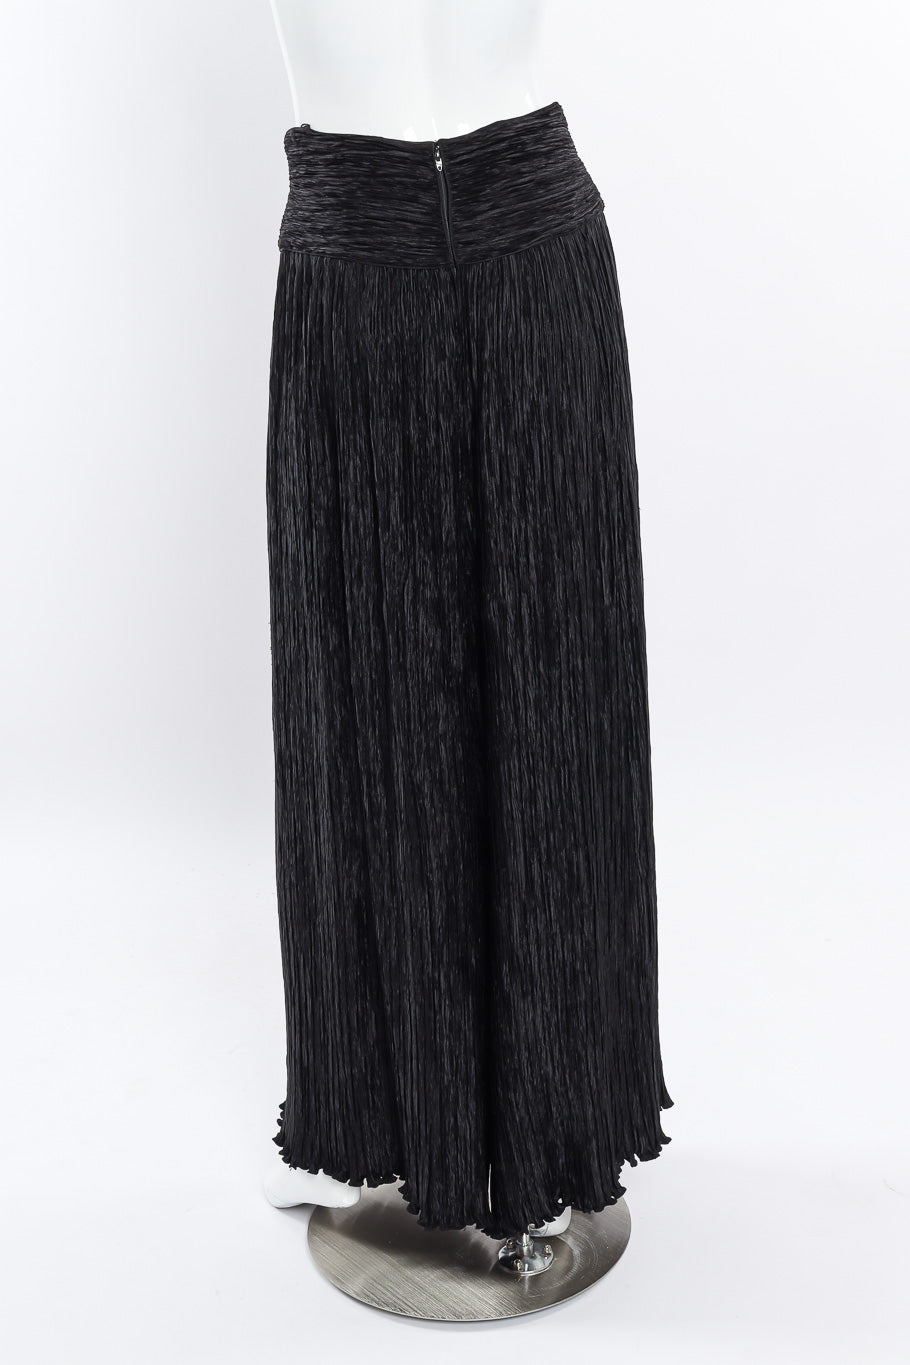 Pleated palazzo pant by Mary McFadden on mannequin back @recessla